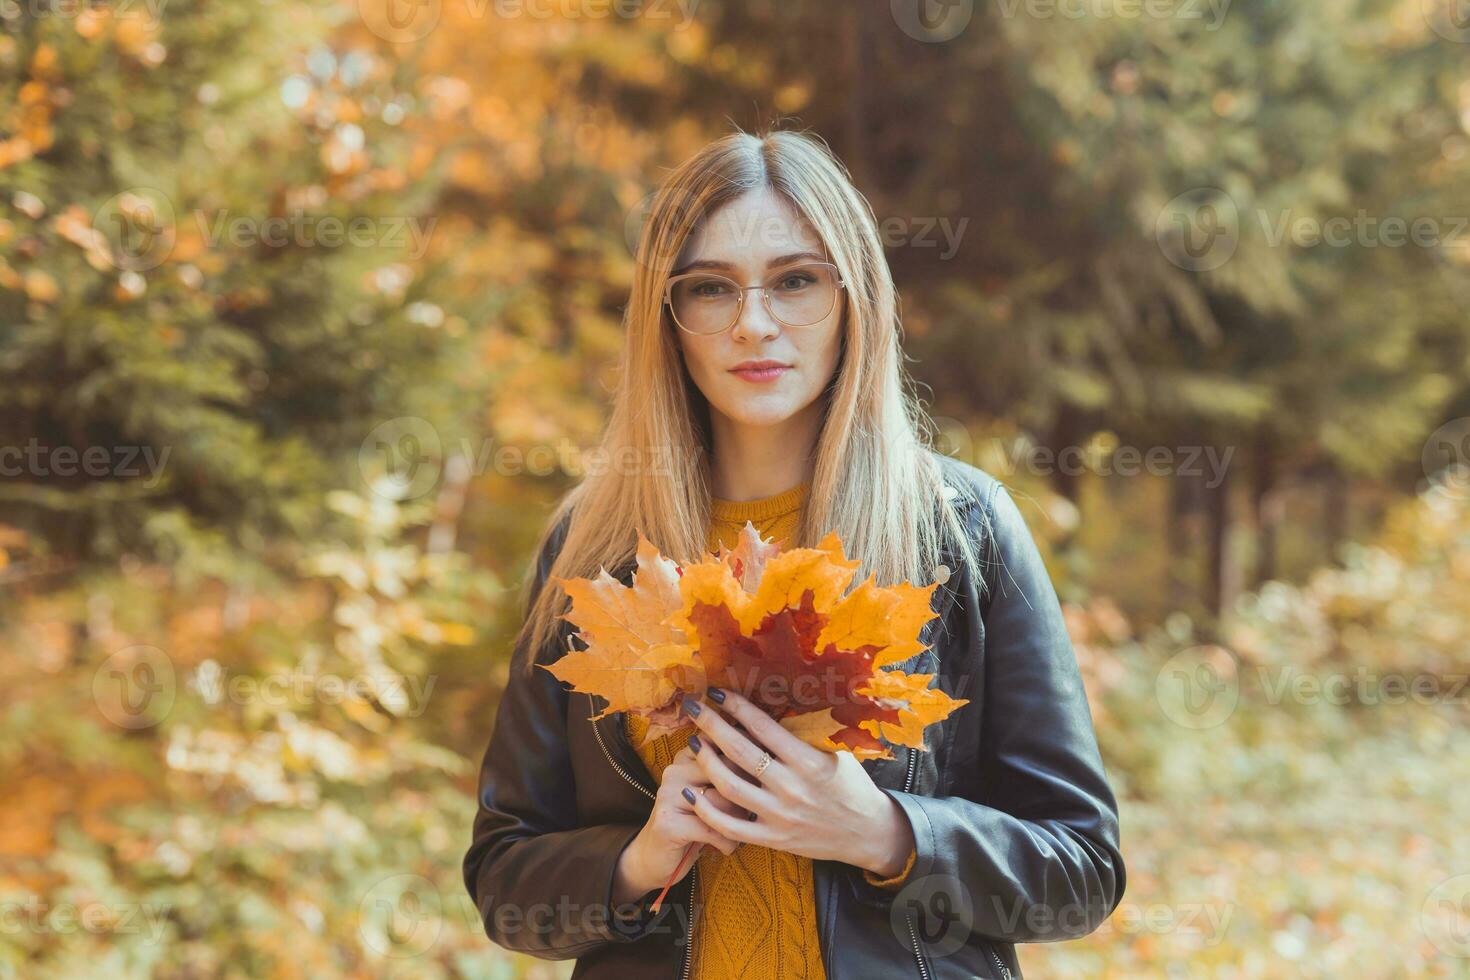 Cute smiley woman holding autumn leaves in fall park. Seasonal, lifestyle and leisure concept. photo